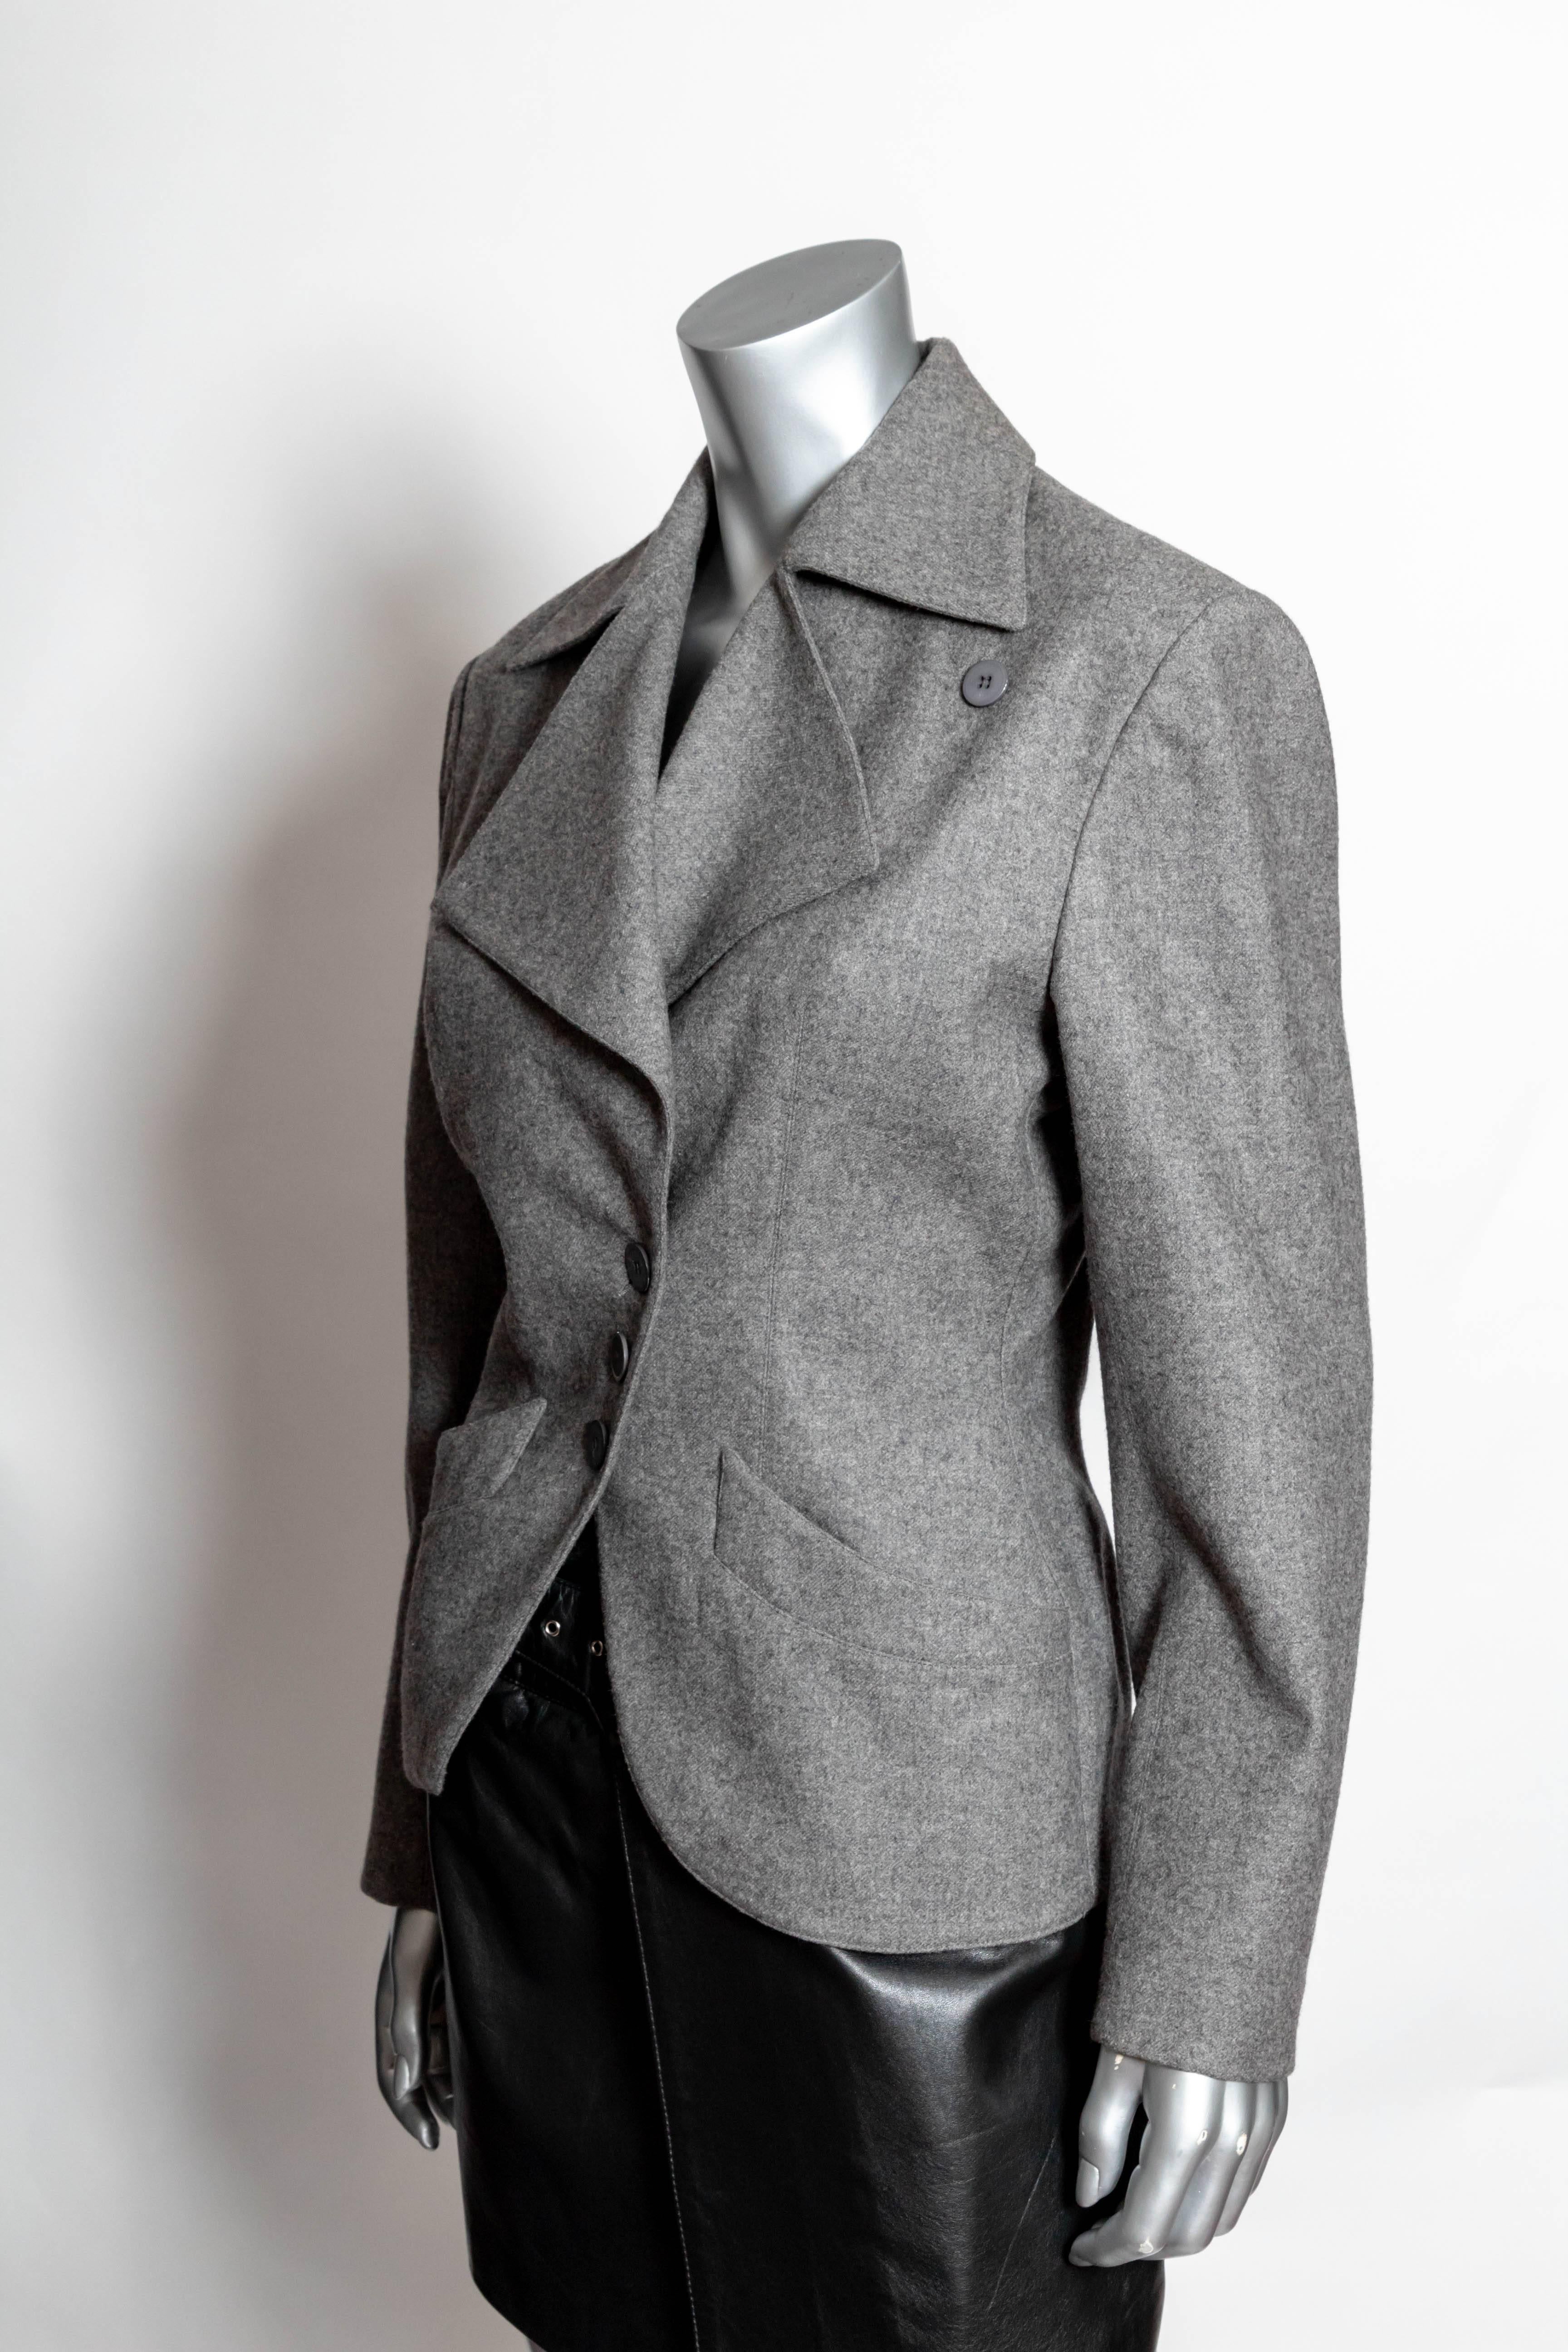 Incredibly chic Azzedine Alaia grey jacket in excellent condition.
Three buttons are positioned asymmetrically with a fourth positioned to close the lapels, giving this jacket an entirely different look. 
Three buttons at each cuff.
Sleeve length